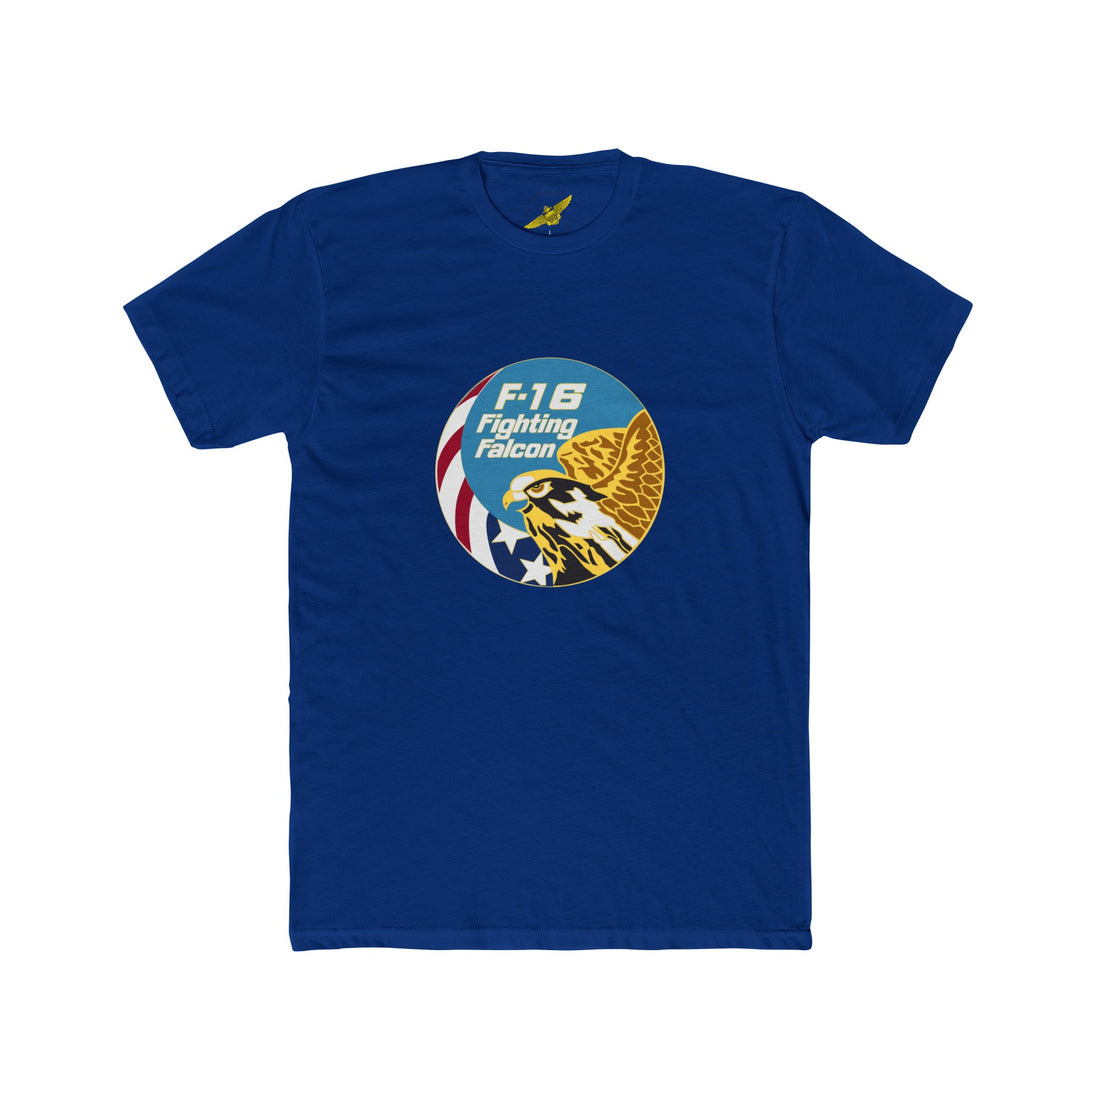 F-16 Fighting Falcon Logo Men's Cotton Crew Tee, USAF Fighter Aircraft